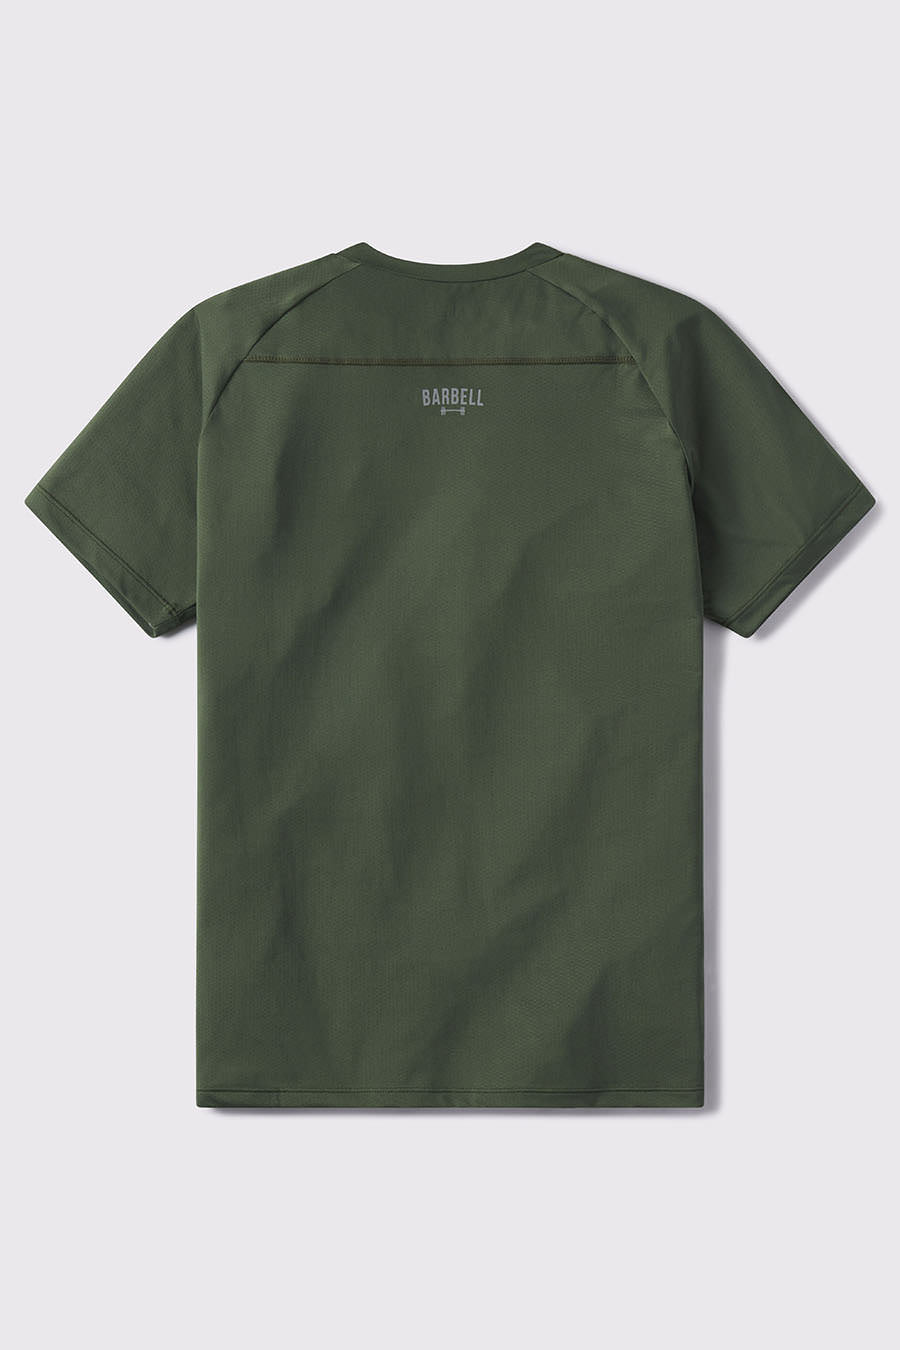 One Mile Out Ultralight Tech Tee - Rifle - photo from back flat lay #color_rifle